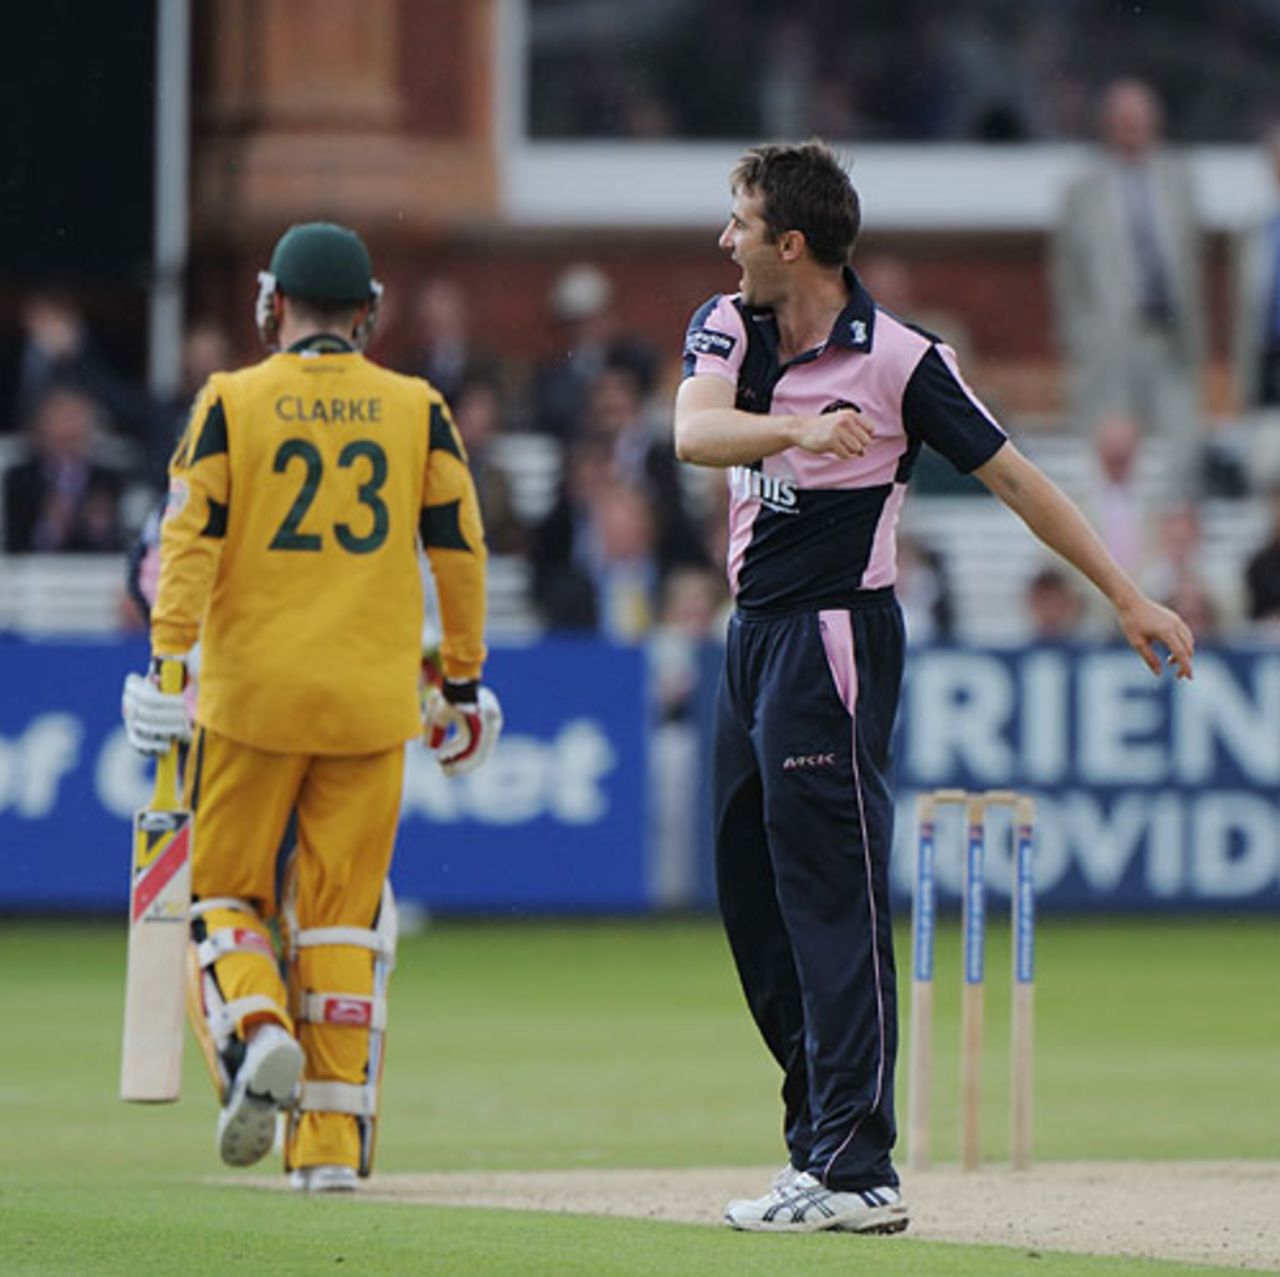 Tim Murtagh saw the back of Michael Clarke for a duck, Middlesex v Australians, Tour Match, Lord's, June 19, 2010